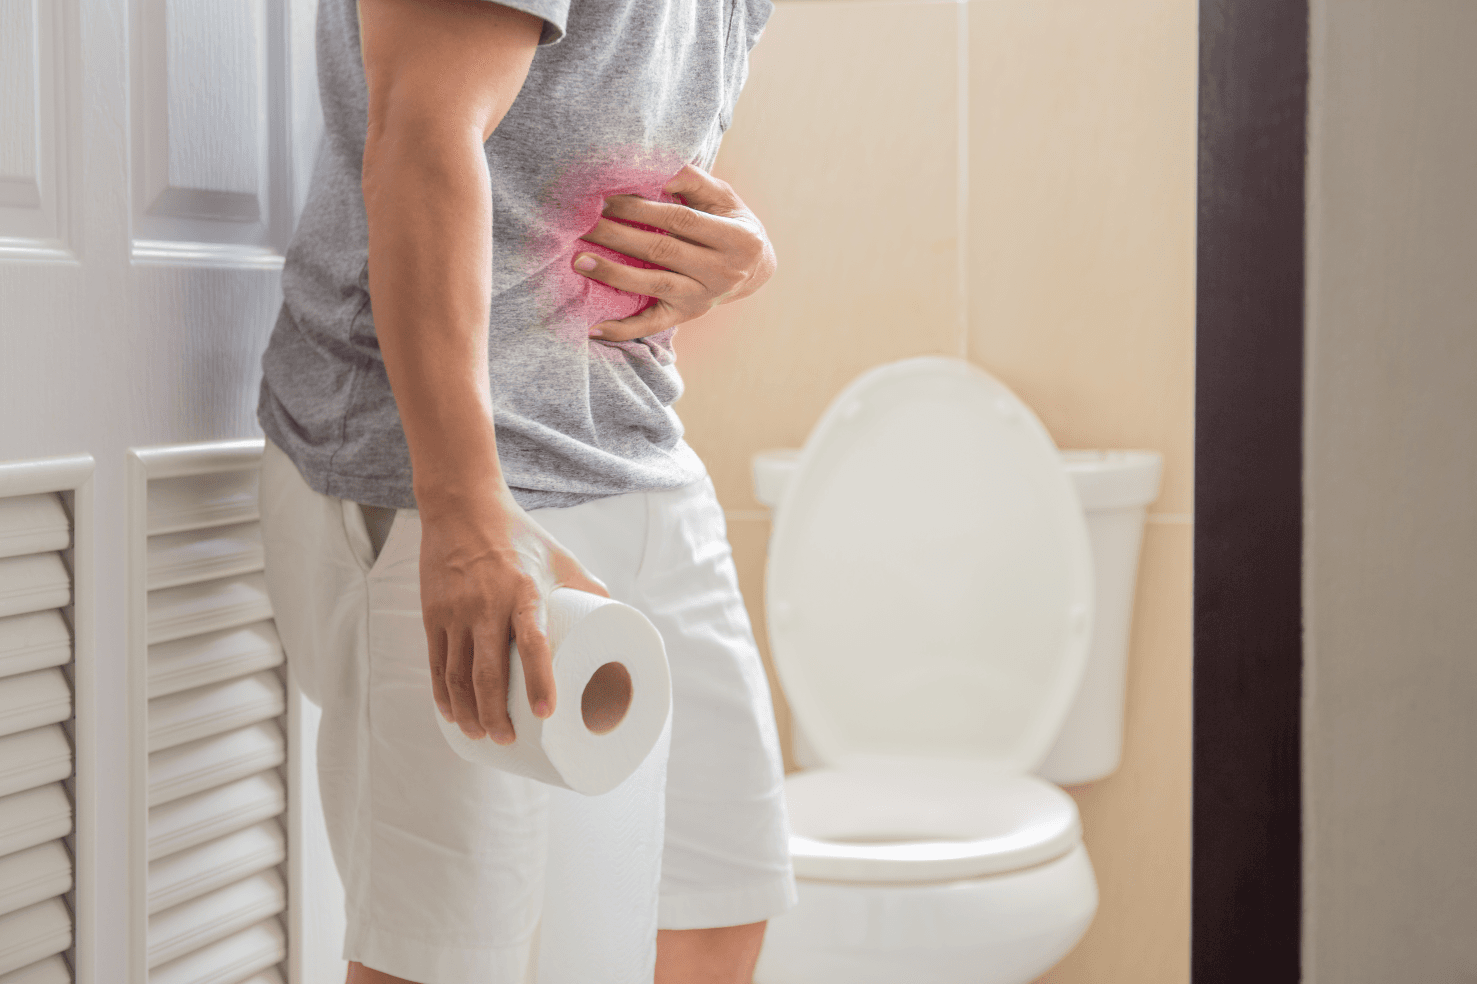 A Guide To Diarrhea: Causes, Symptoms And Treatment